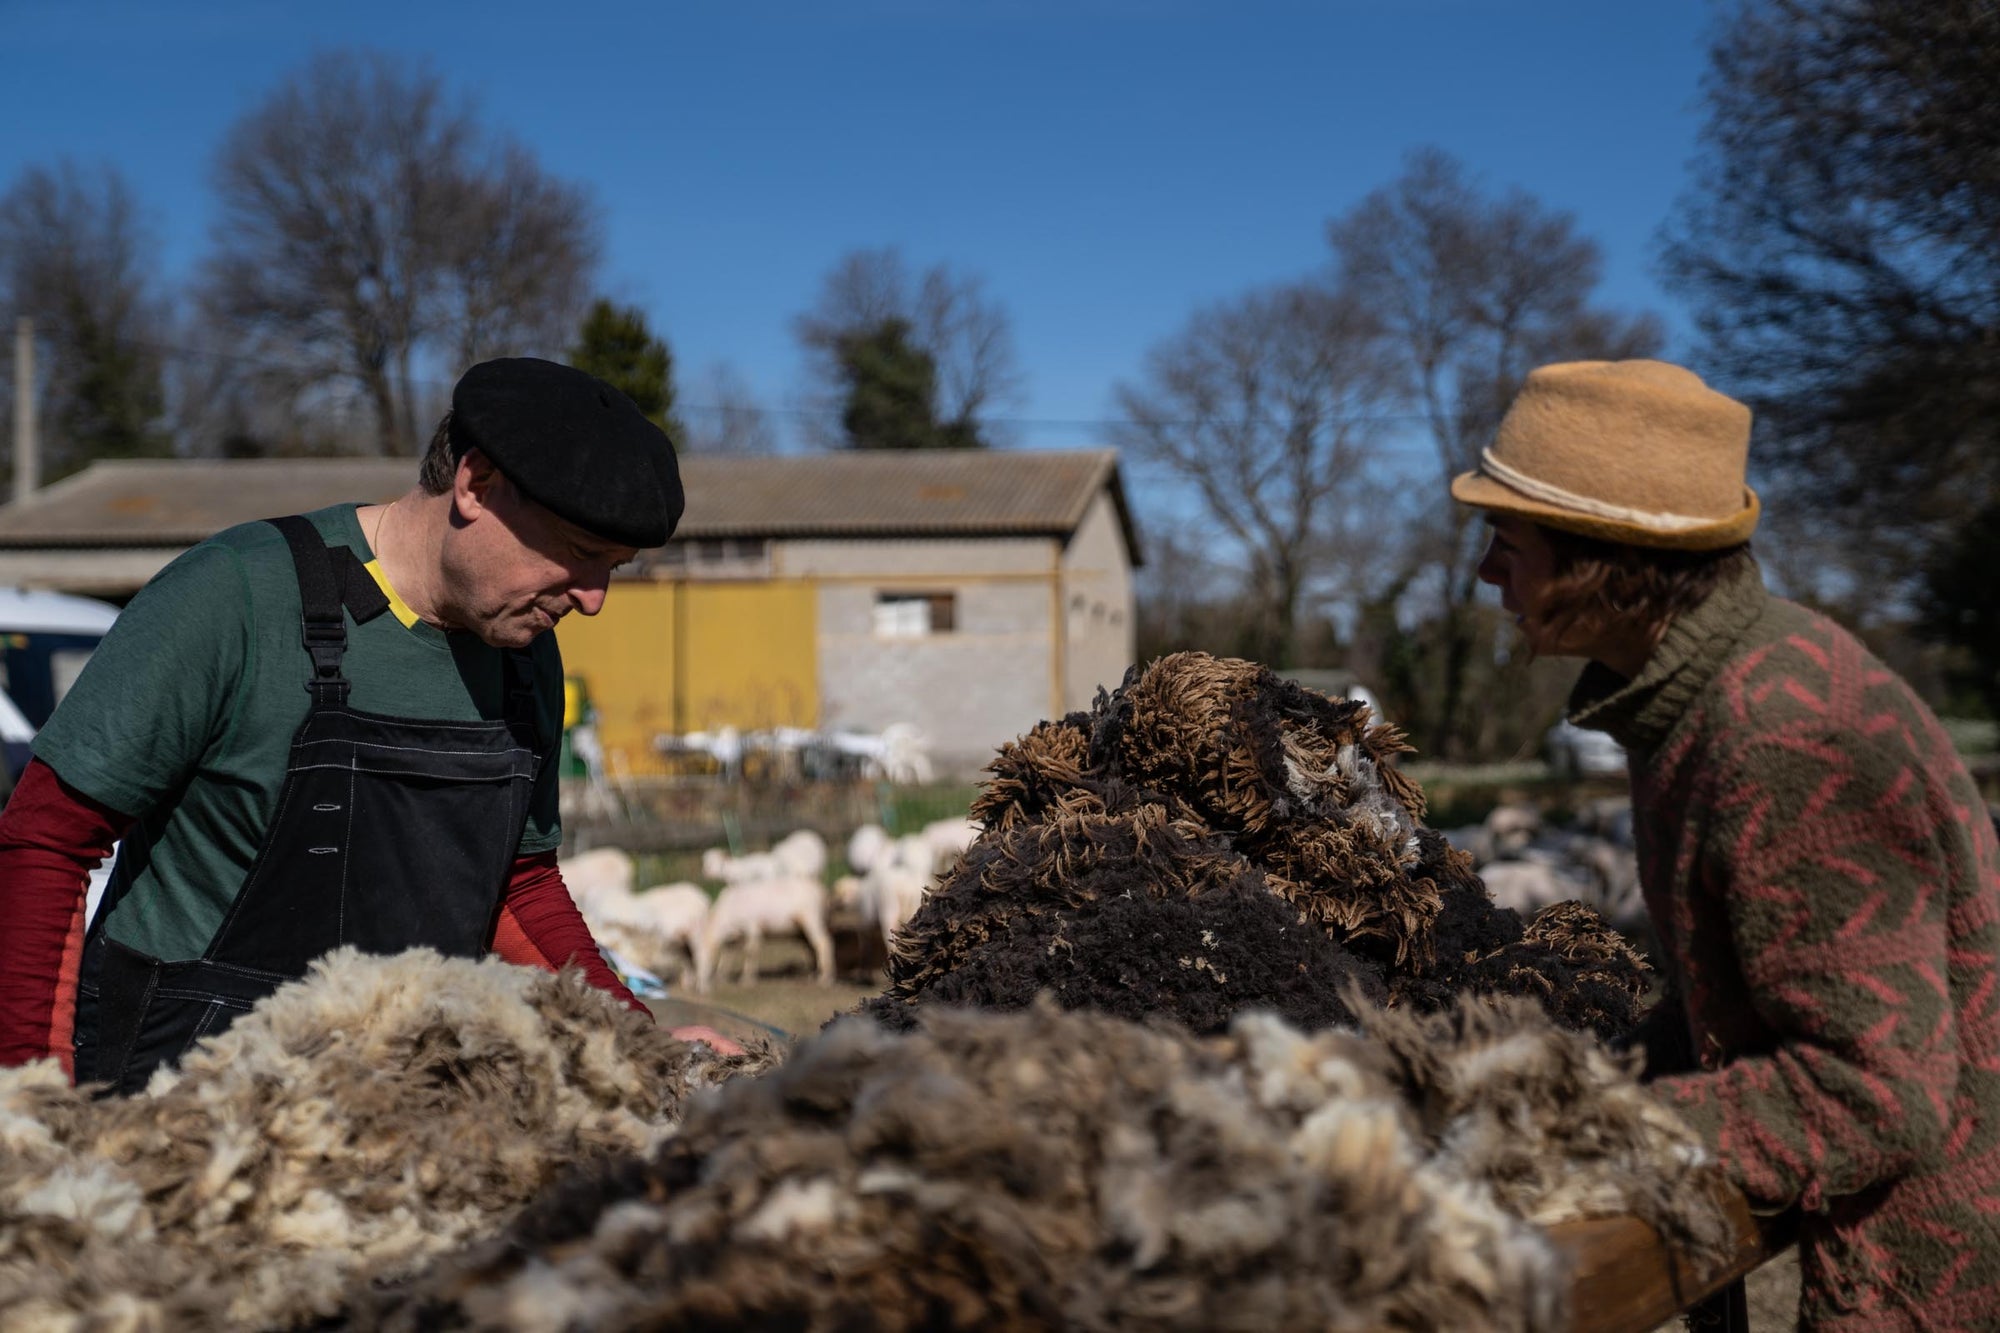 A shepherd and wool trader inspecting the quality of Merino d'Arles wool fleece on a sorting table